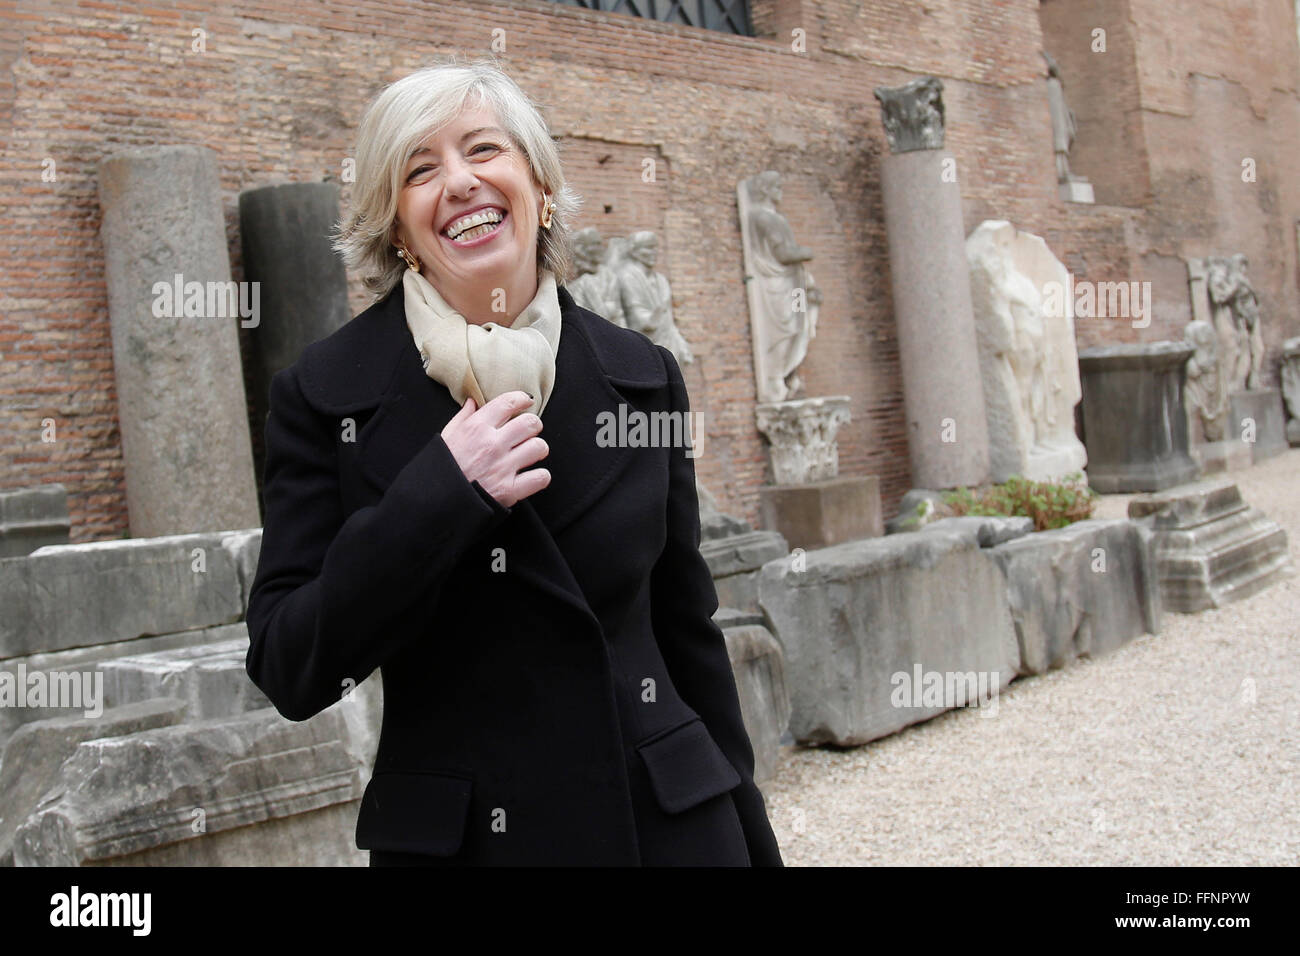 Rome, Italy. 16th February, 2016. Stefania Giannini Rome 16th February 2016. Baths of Diocleziano. Cerimony for the birth of the Italian Task Force, Unite for Heritage, in defense of the cultural heritage.  Credit:  Insidefoto/Alamy Live News Stock Photo